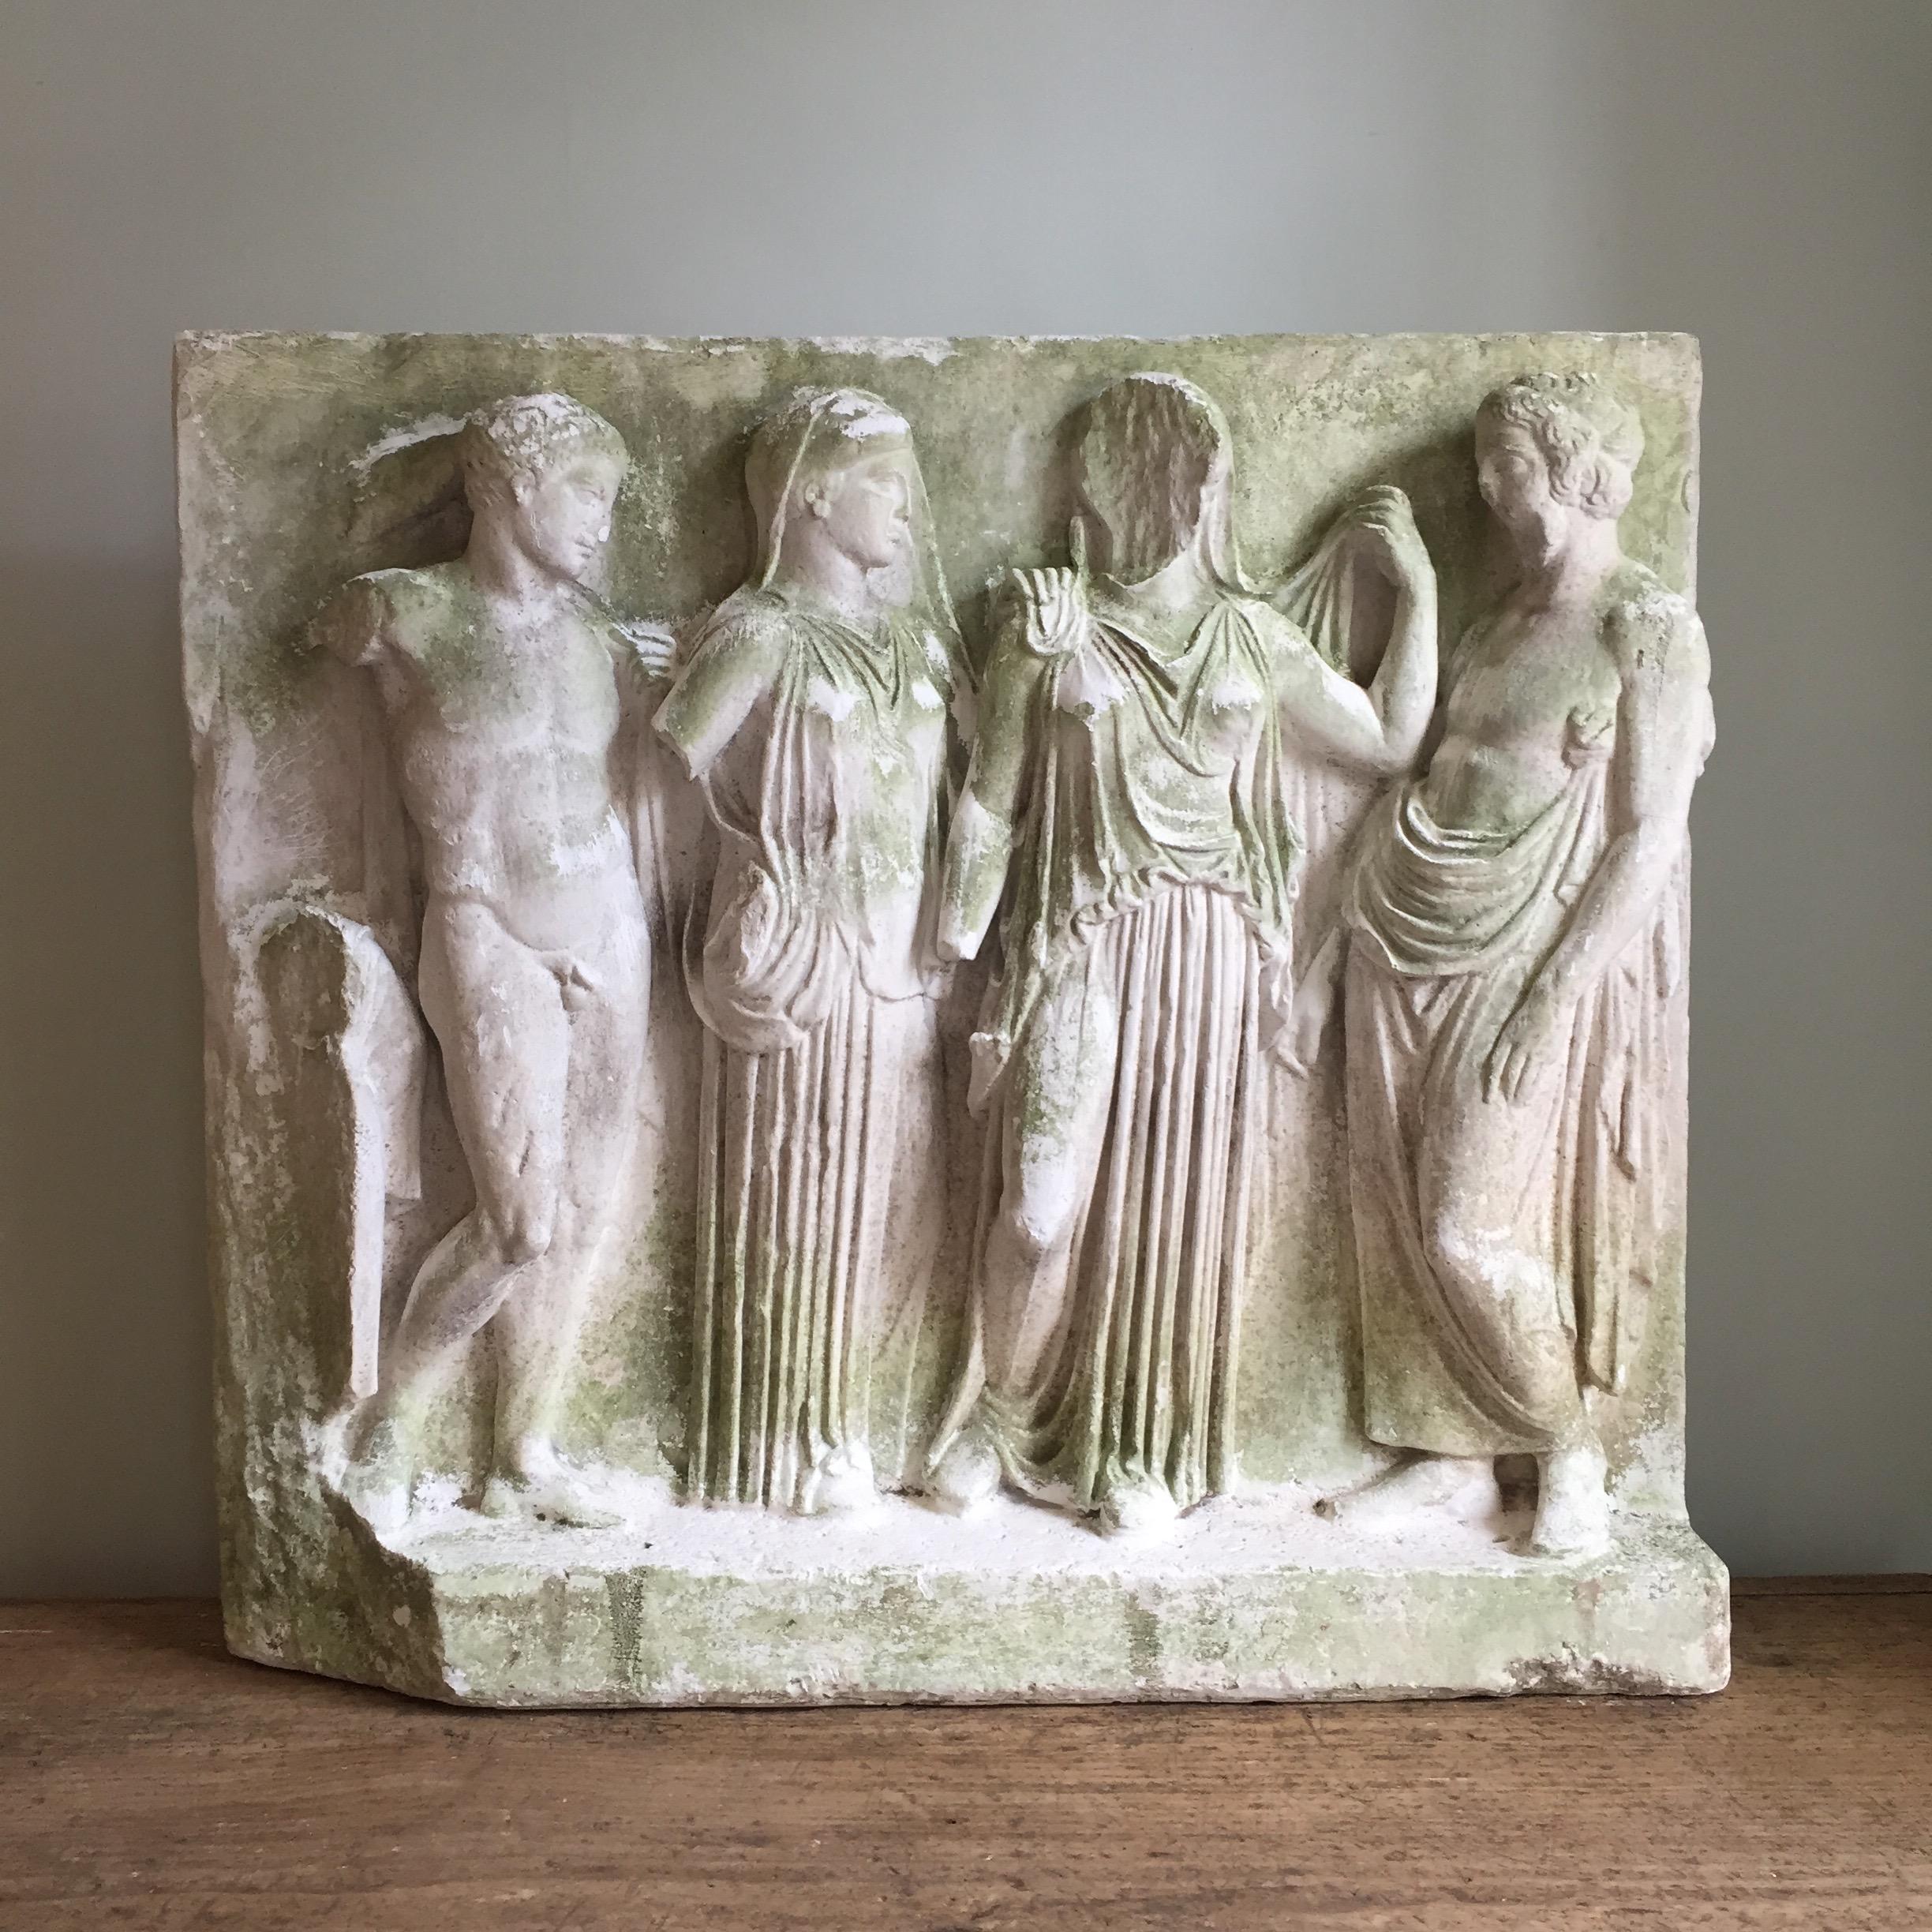 A beautifully, naturally weathered Roman relief in plaster. The frieze depicts four figures. There is some slight loss to the piece but the majority of the damage, such as to the faces, would have been apparent on the original.

To the side of the